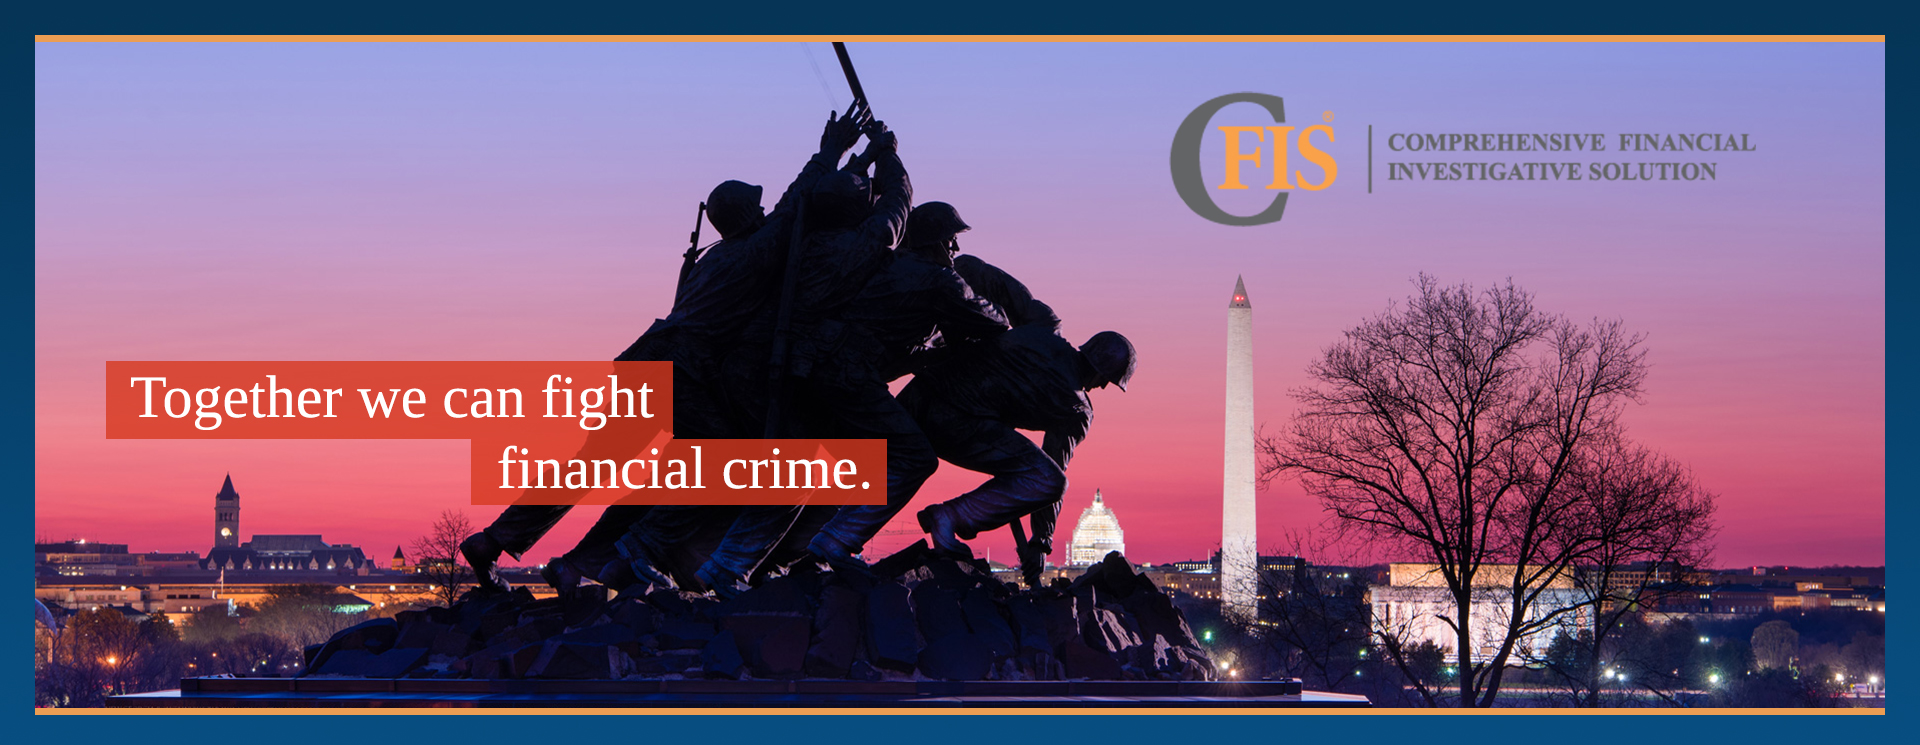 Together we can fight financial crime.